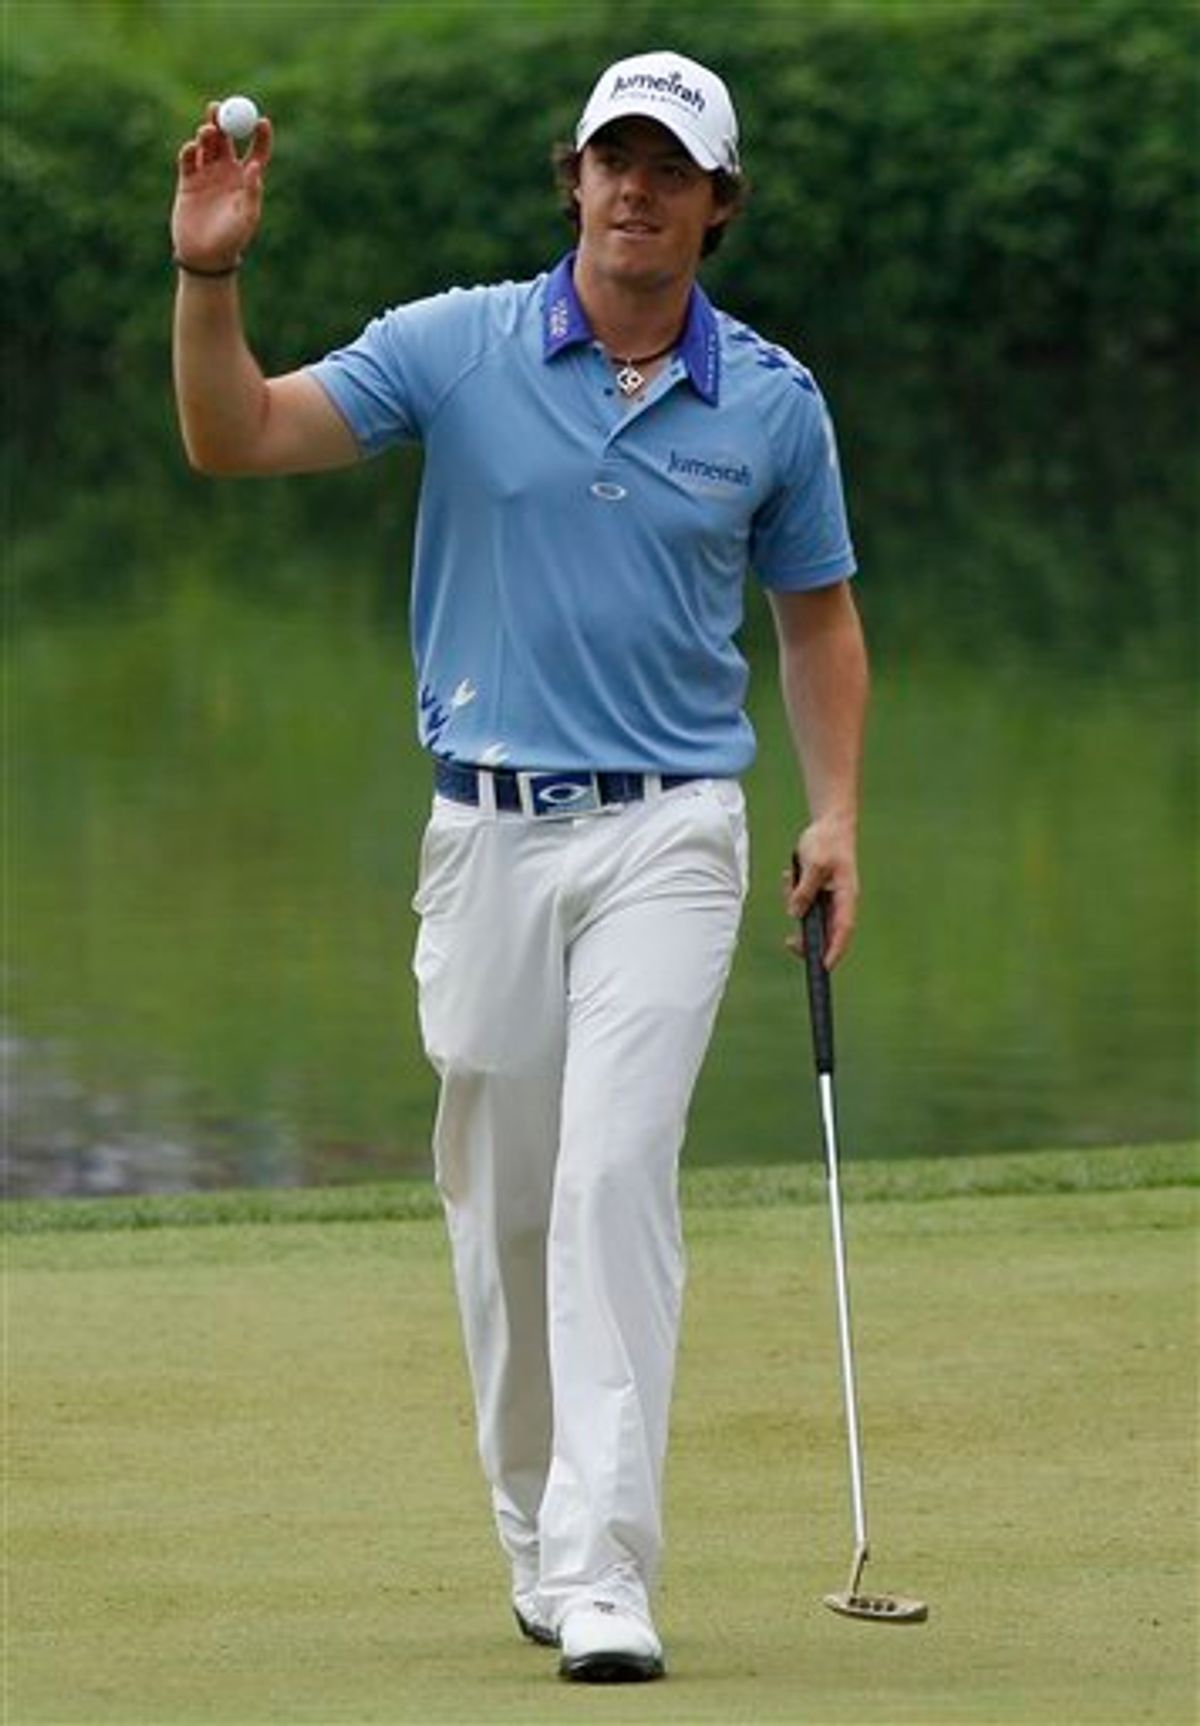 Rory McIlroy, Northern Ireland, waves to the gallery on the 10th green during the final round of the U.S. Open Championship golf tournament in Bethesda, Md., Sunday, June 19, 2011. (AP Photo/Matt Slocum) (AP)